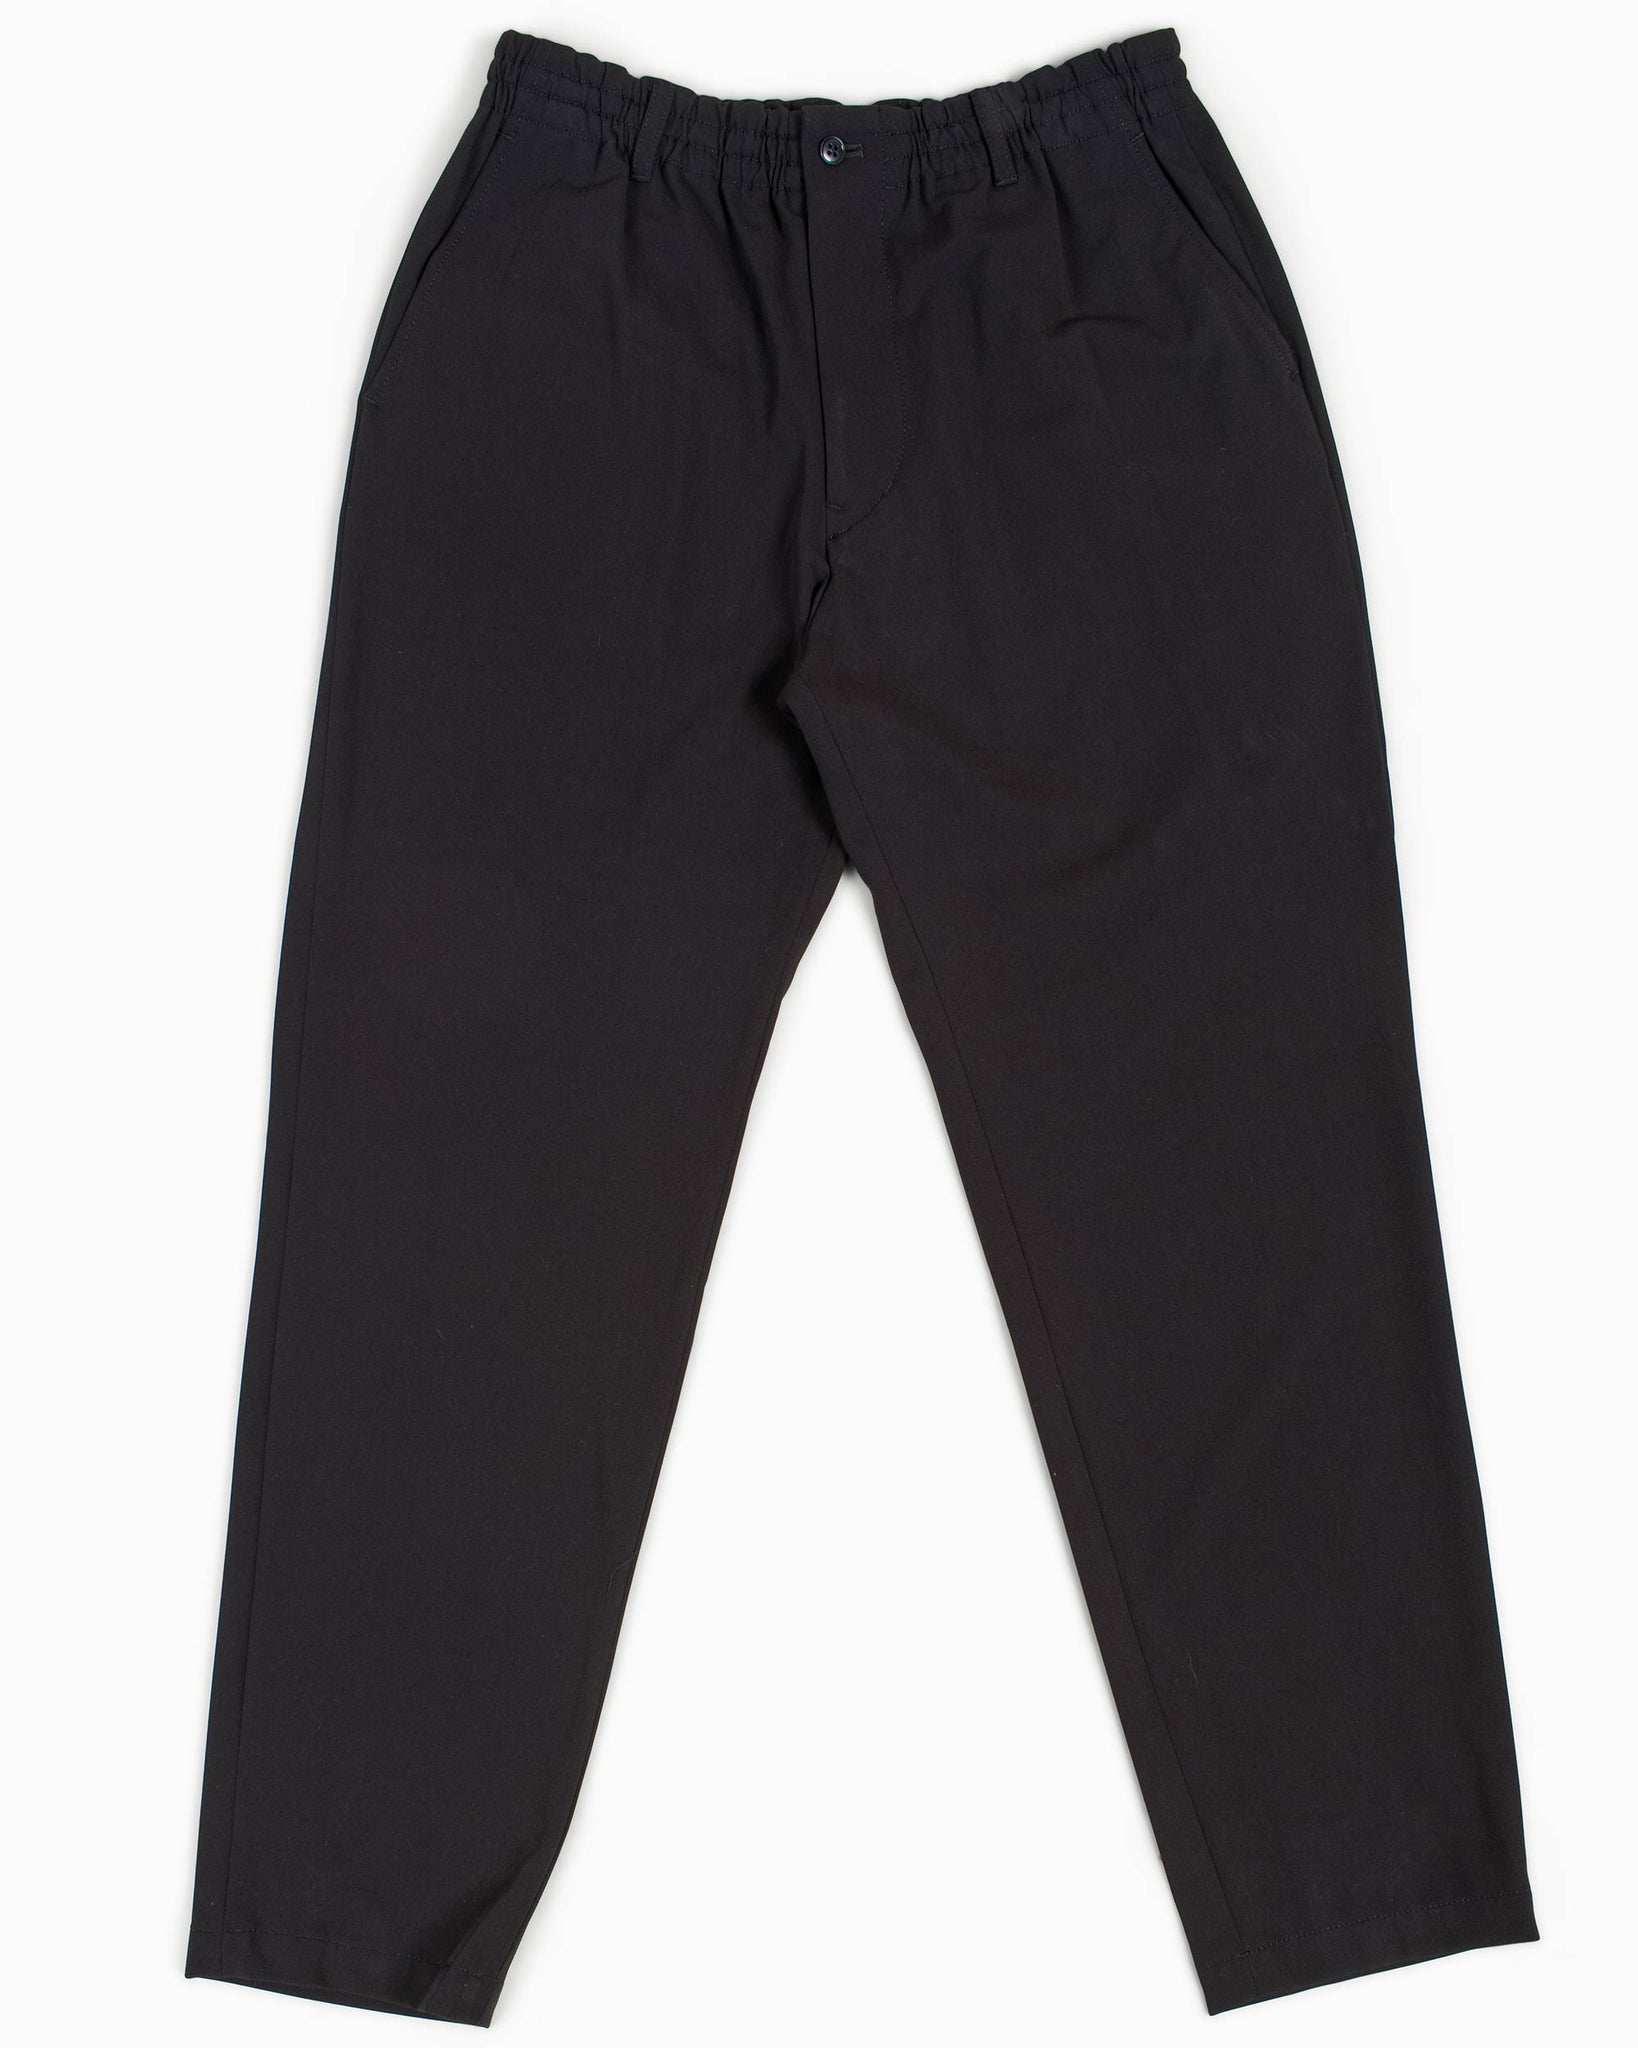 Sage de Cret Tapered Pants Black Polyester/Rayon 2WAY Stretch